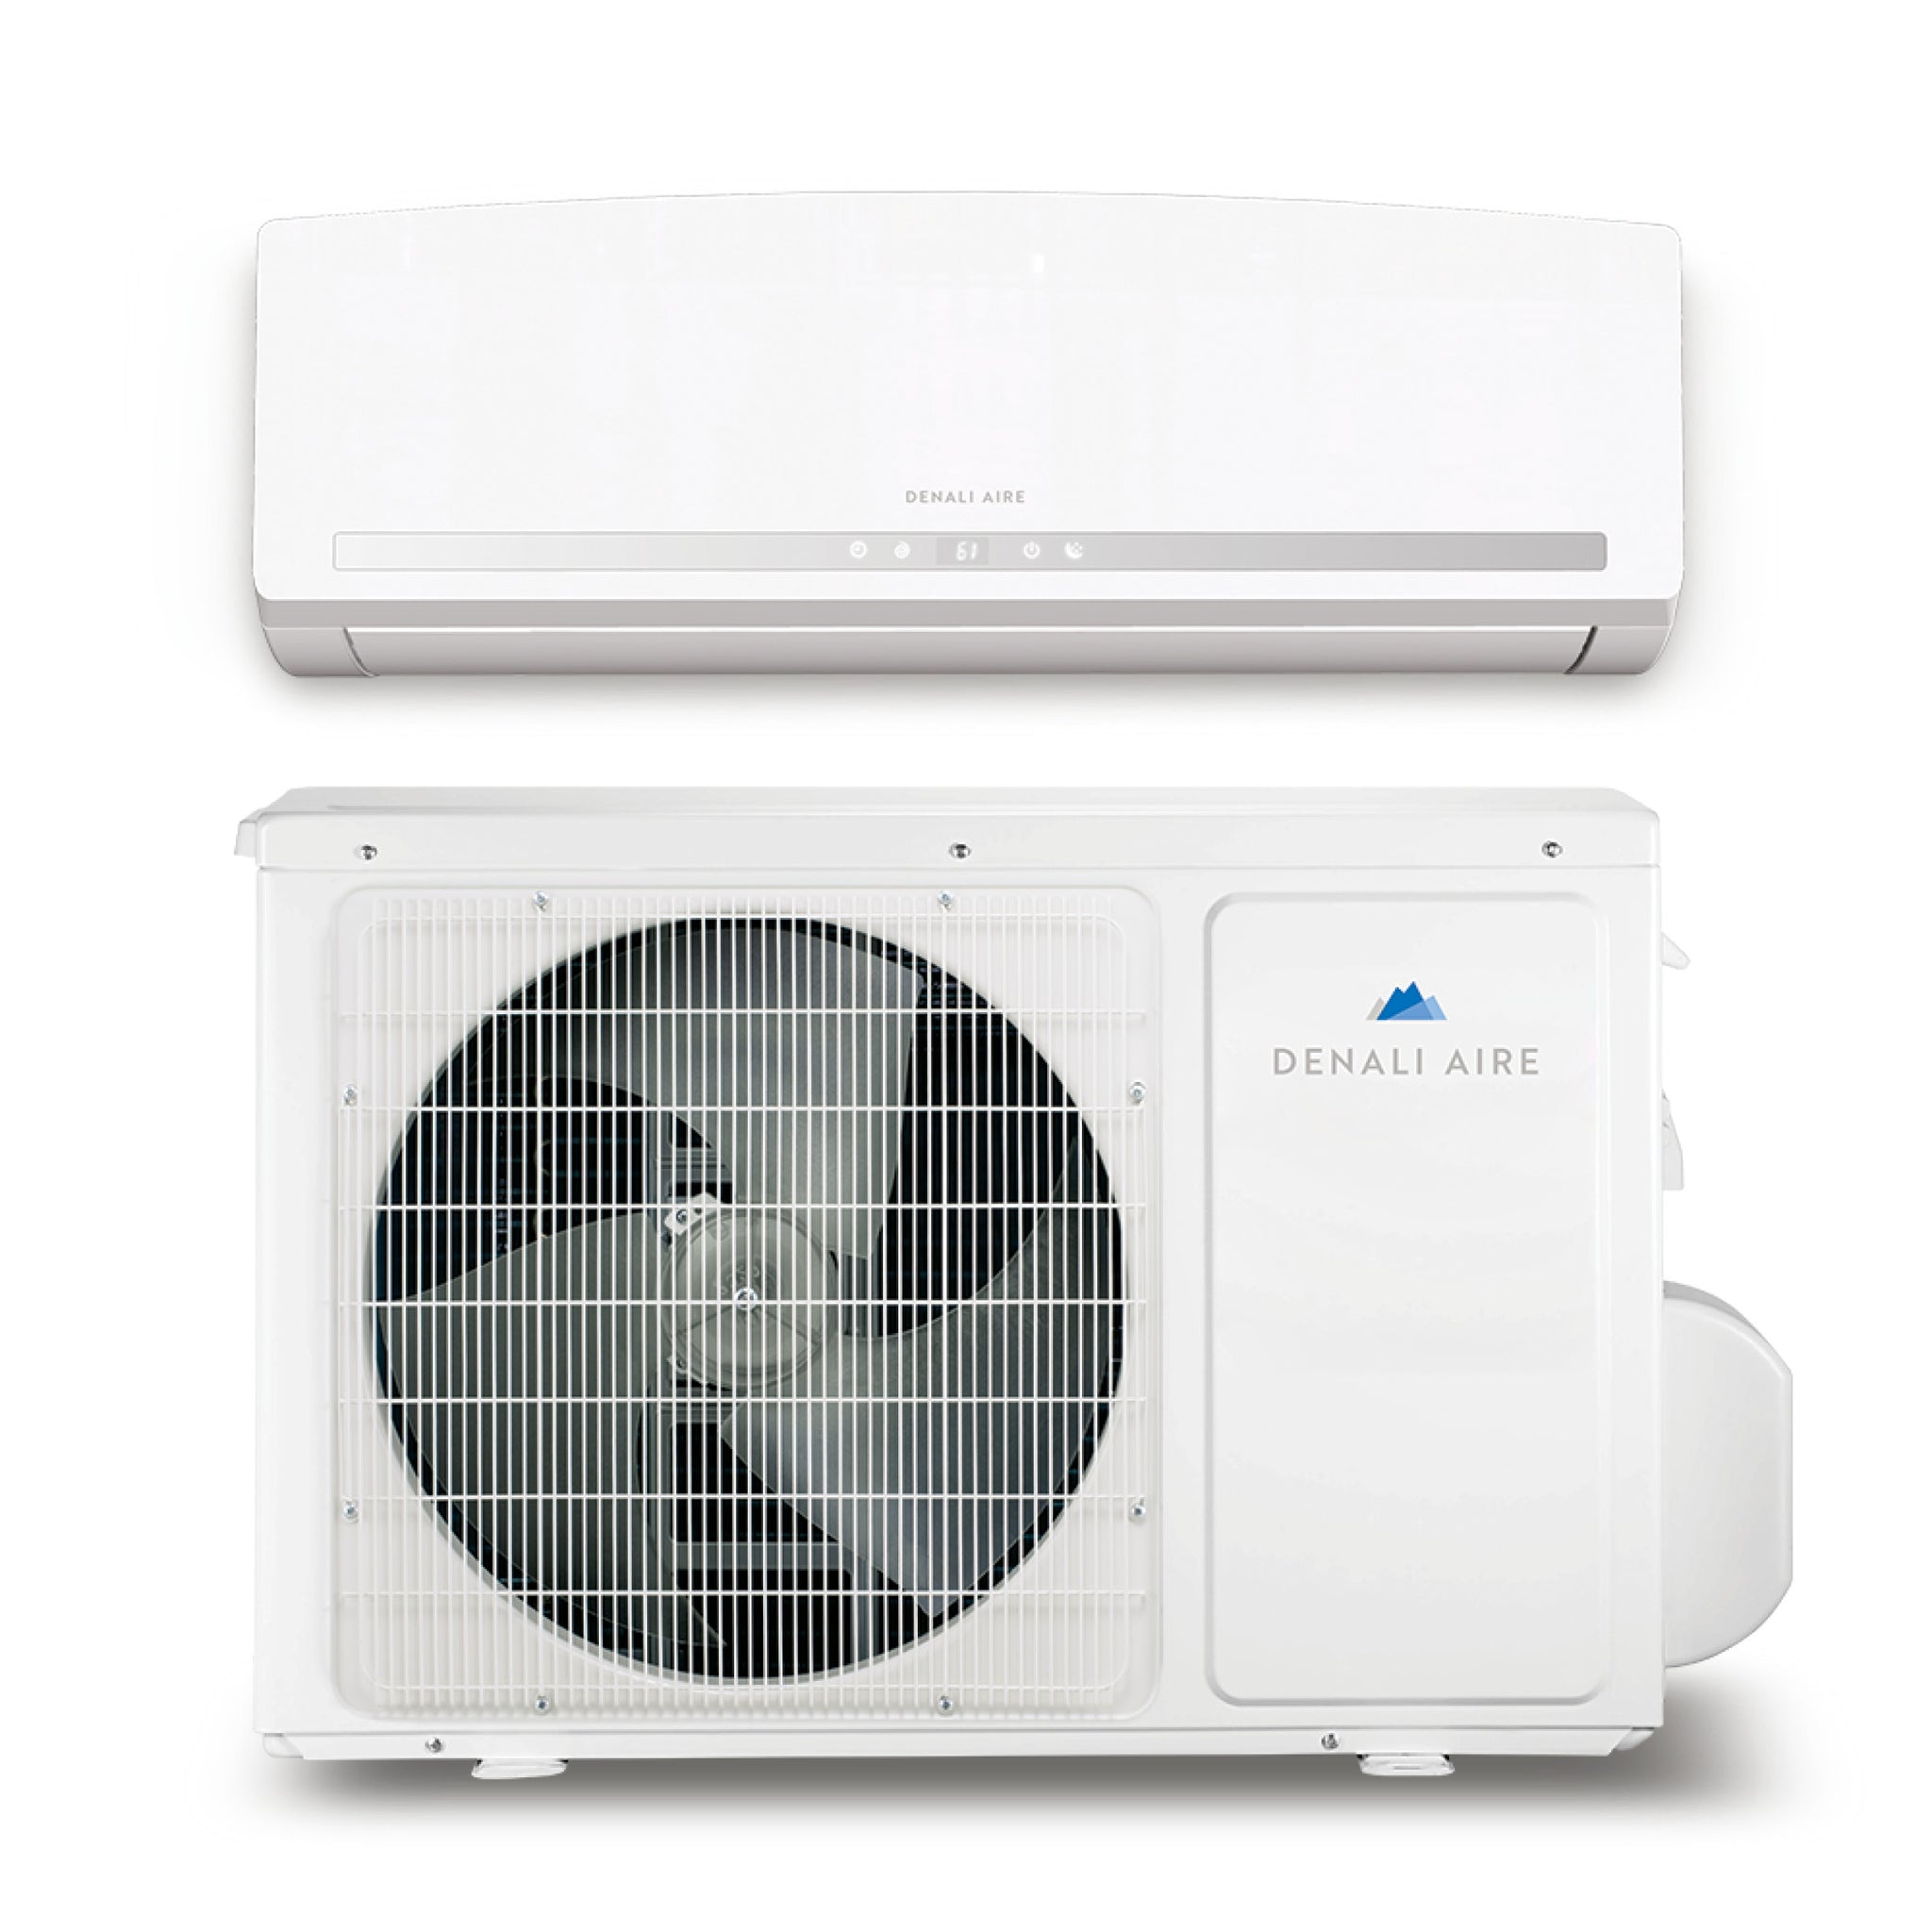 Who Makes Denali Aire Air Conditioners